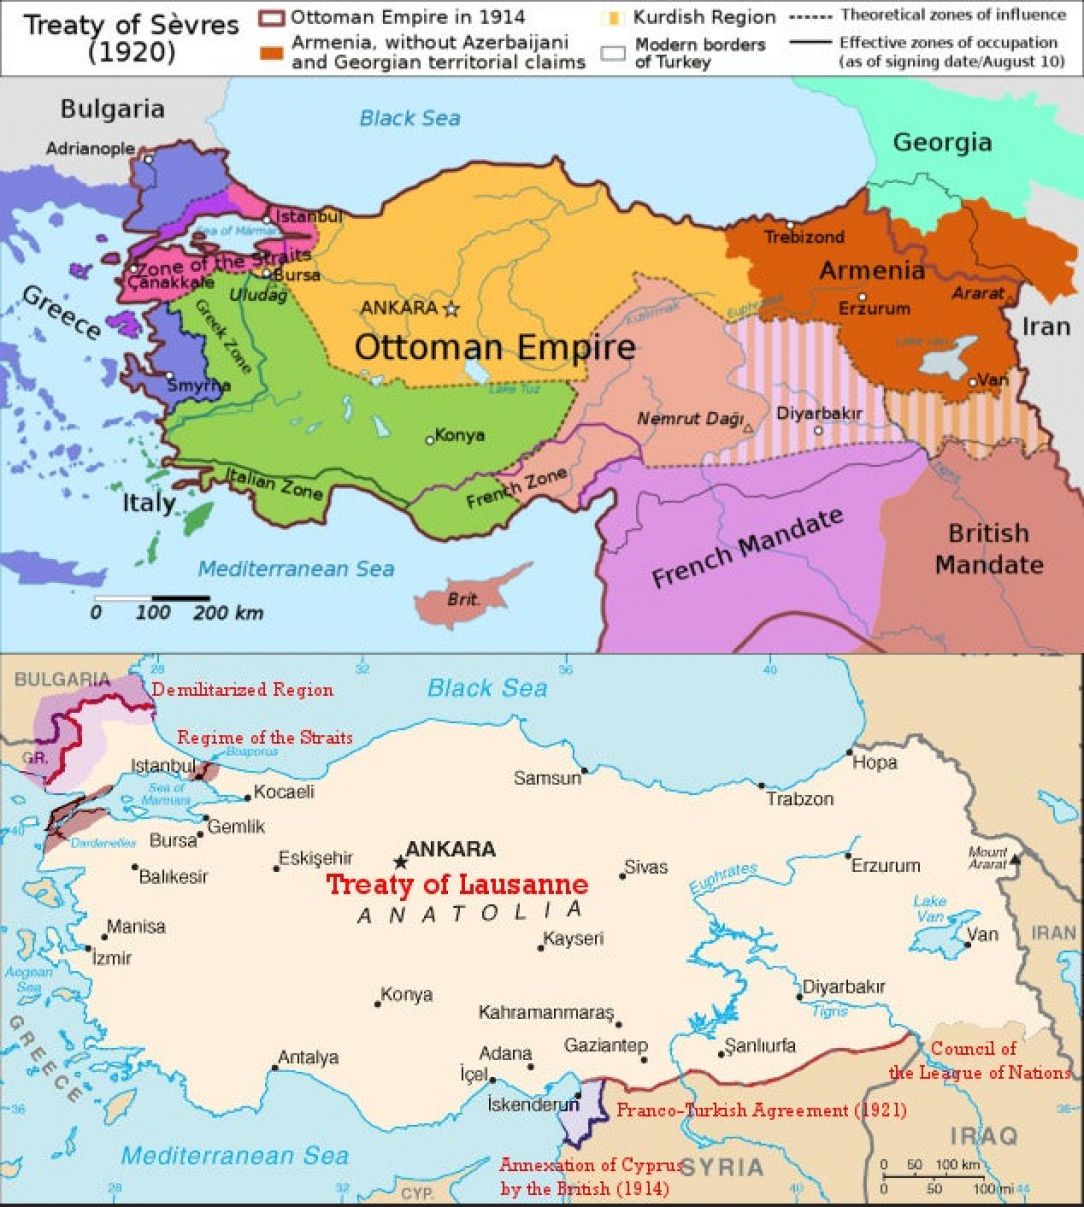 98 years ago today France and Britain signed the Treaty of Lausanne granting independence to Turkey, canceling the partition proposed by the Western powers earlier